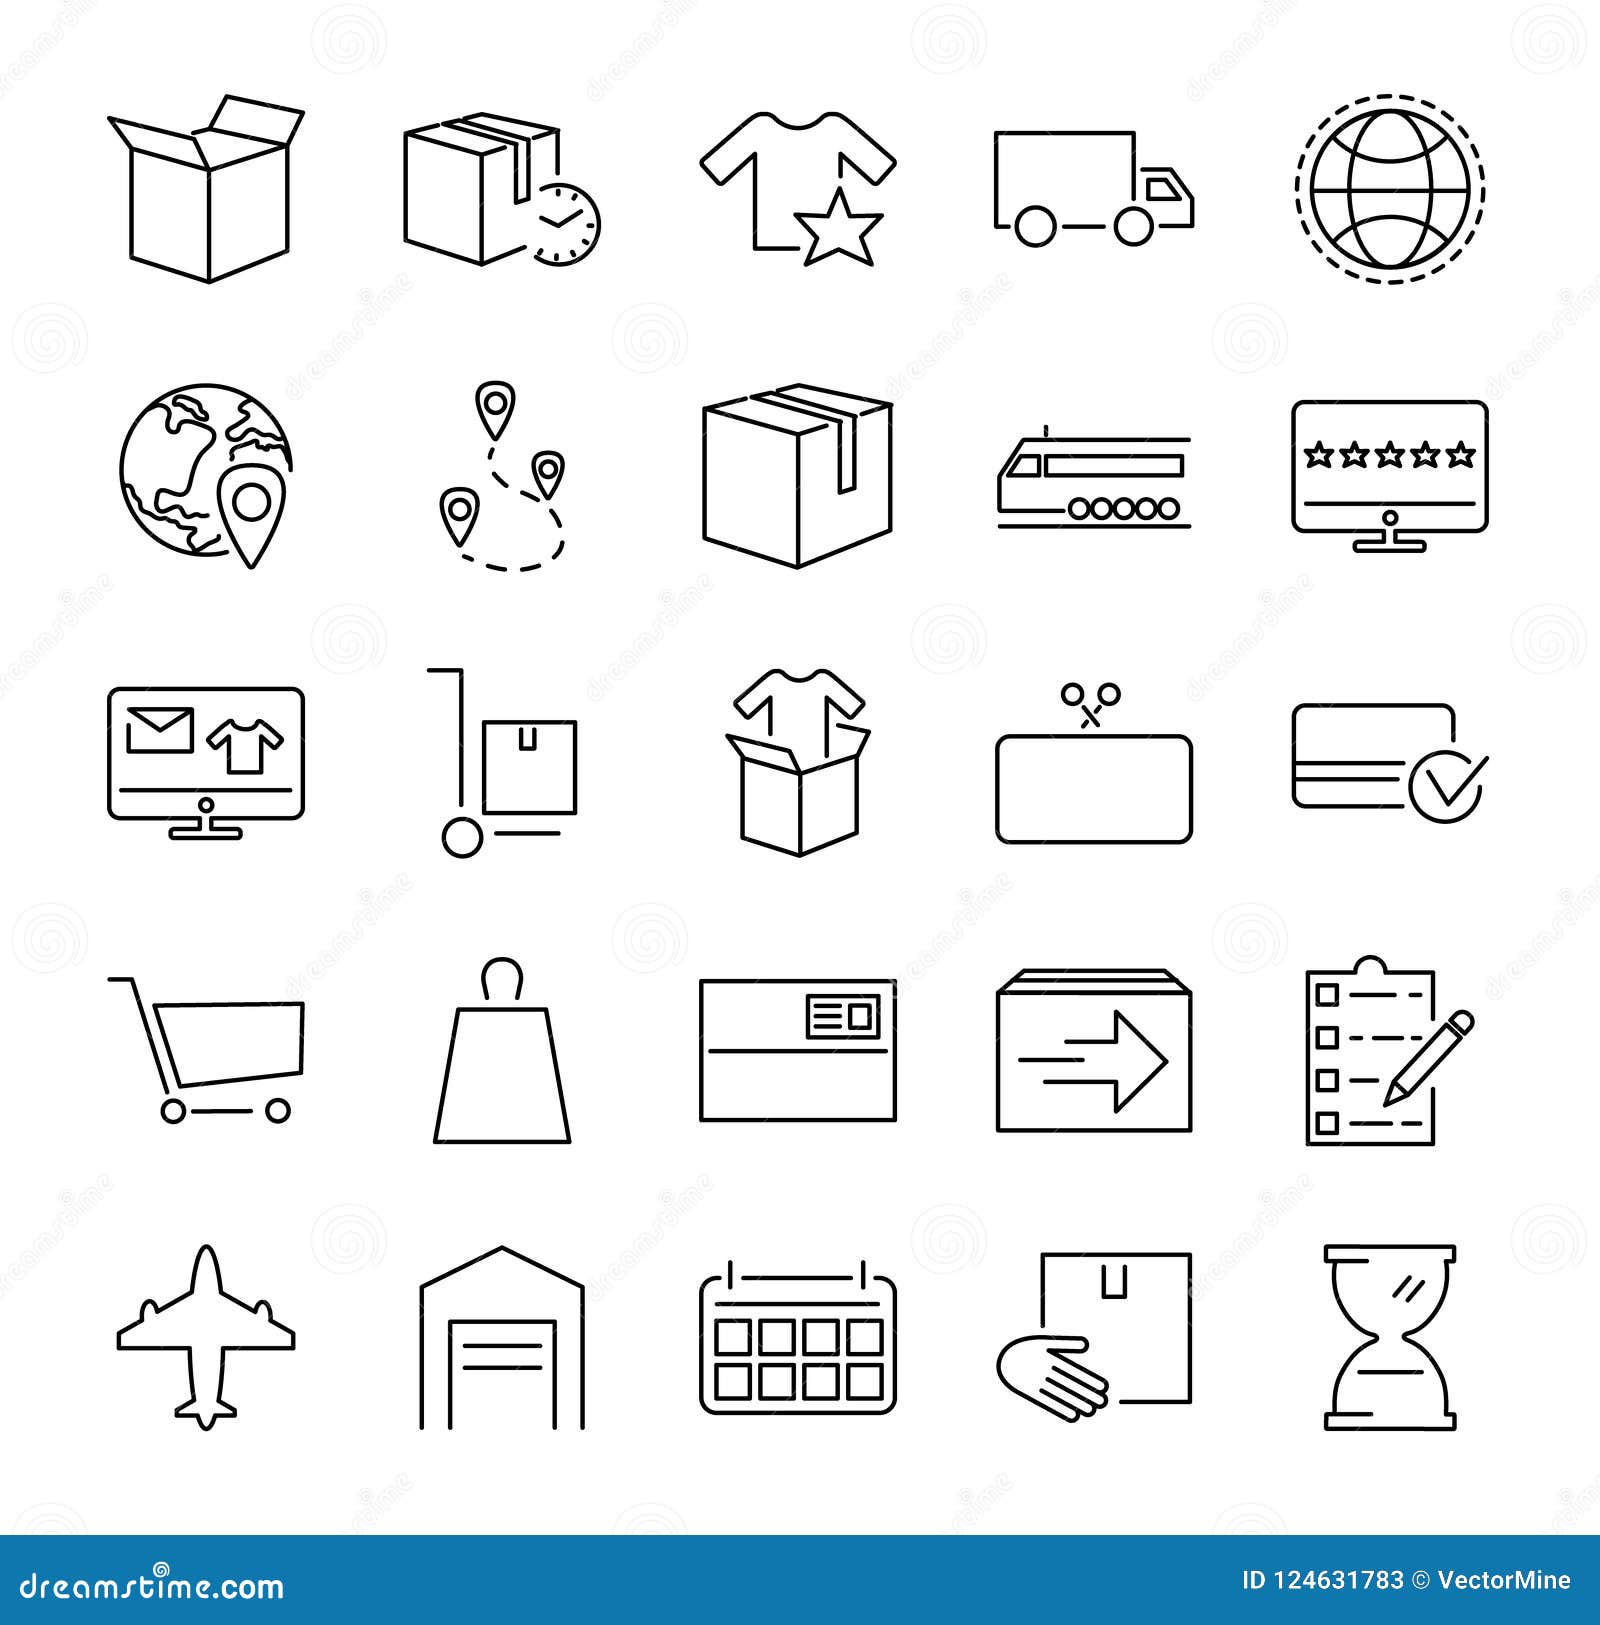 order fulfillment   icon collection. outlined pictorgrams about online shopping, delivery service and packaging.